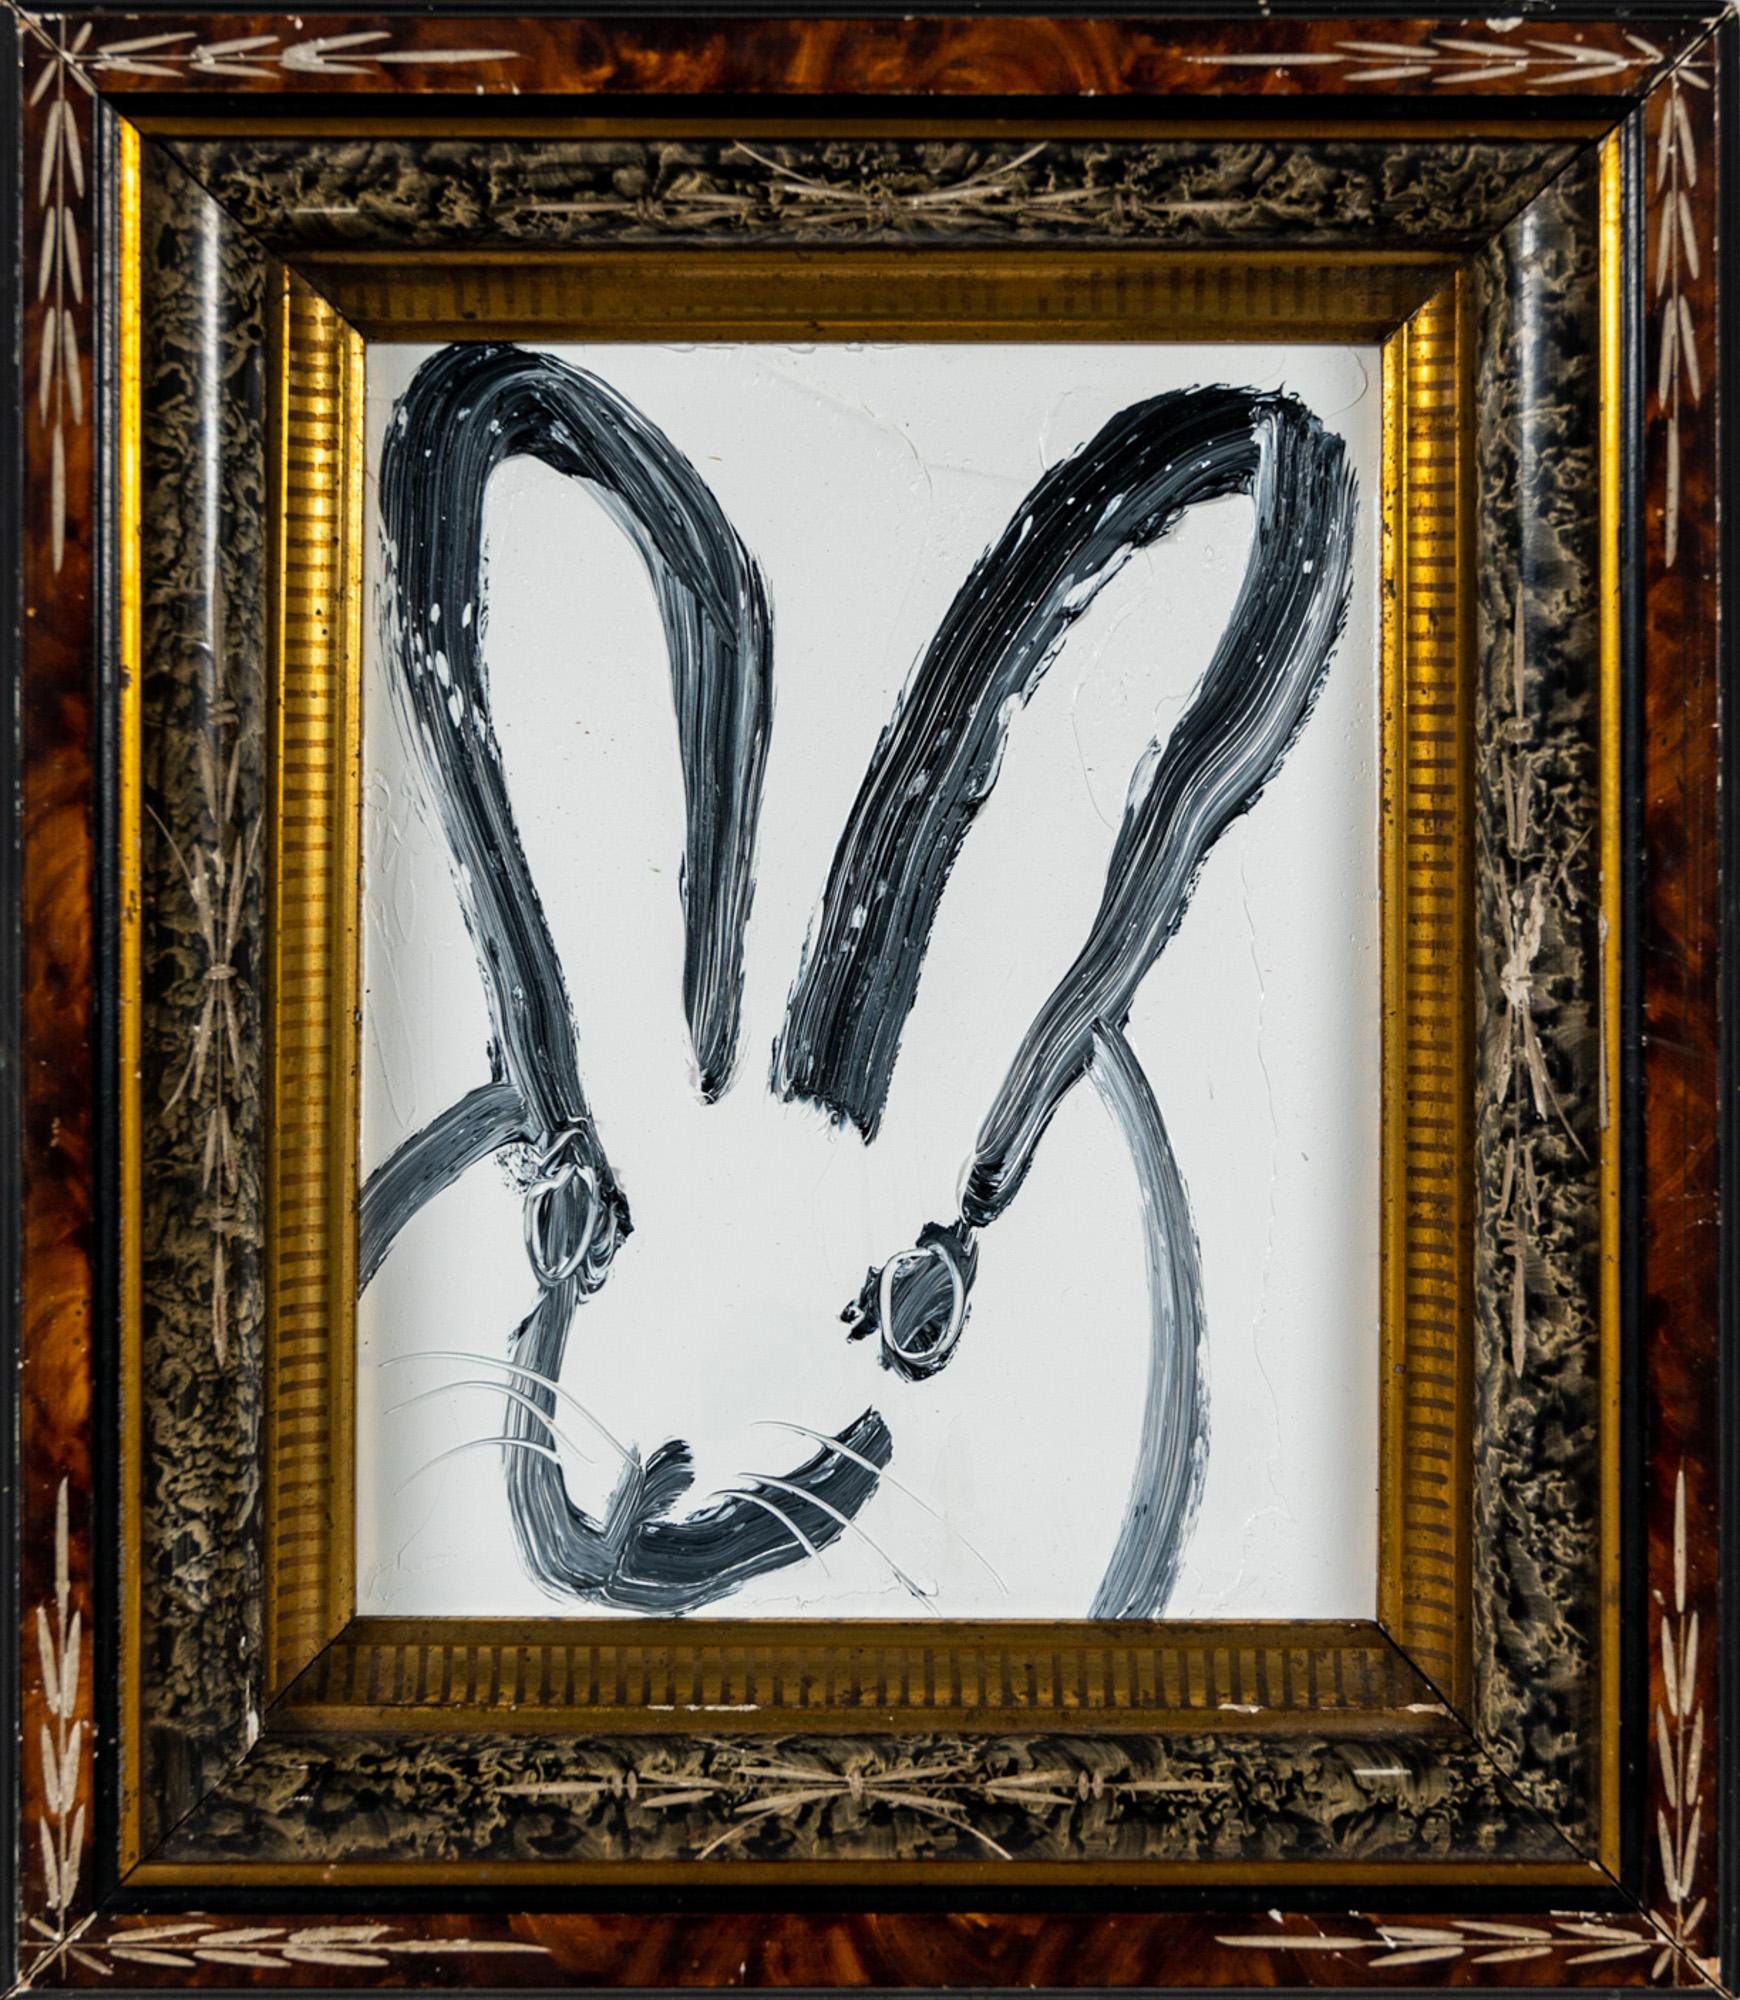 "Leroy" is a framed oil painting on wood by Hunt Slonem, depicting a lone rabbit in painterly contour lines set against a simple white background. 

This piece is finished in an antique frame, which has been hand-selected by the artist for this